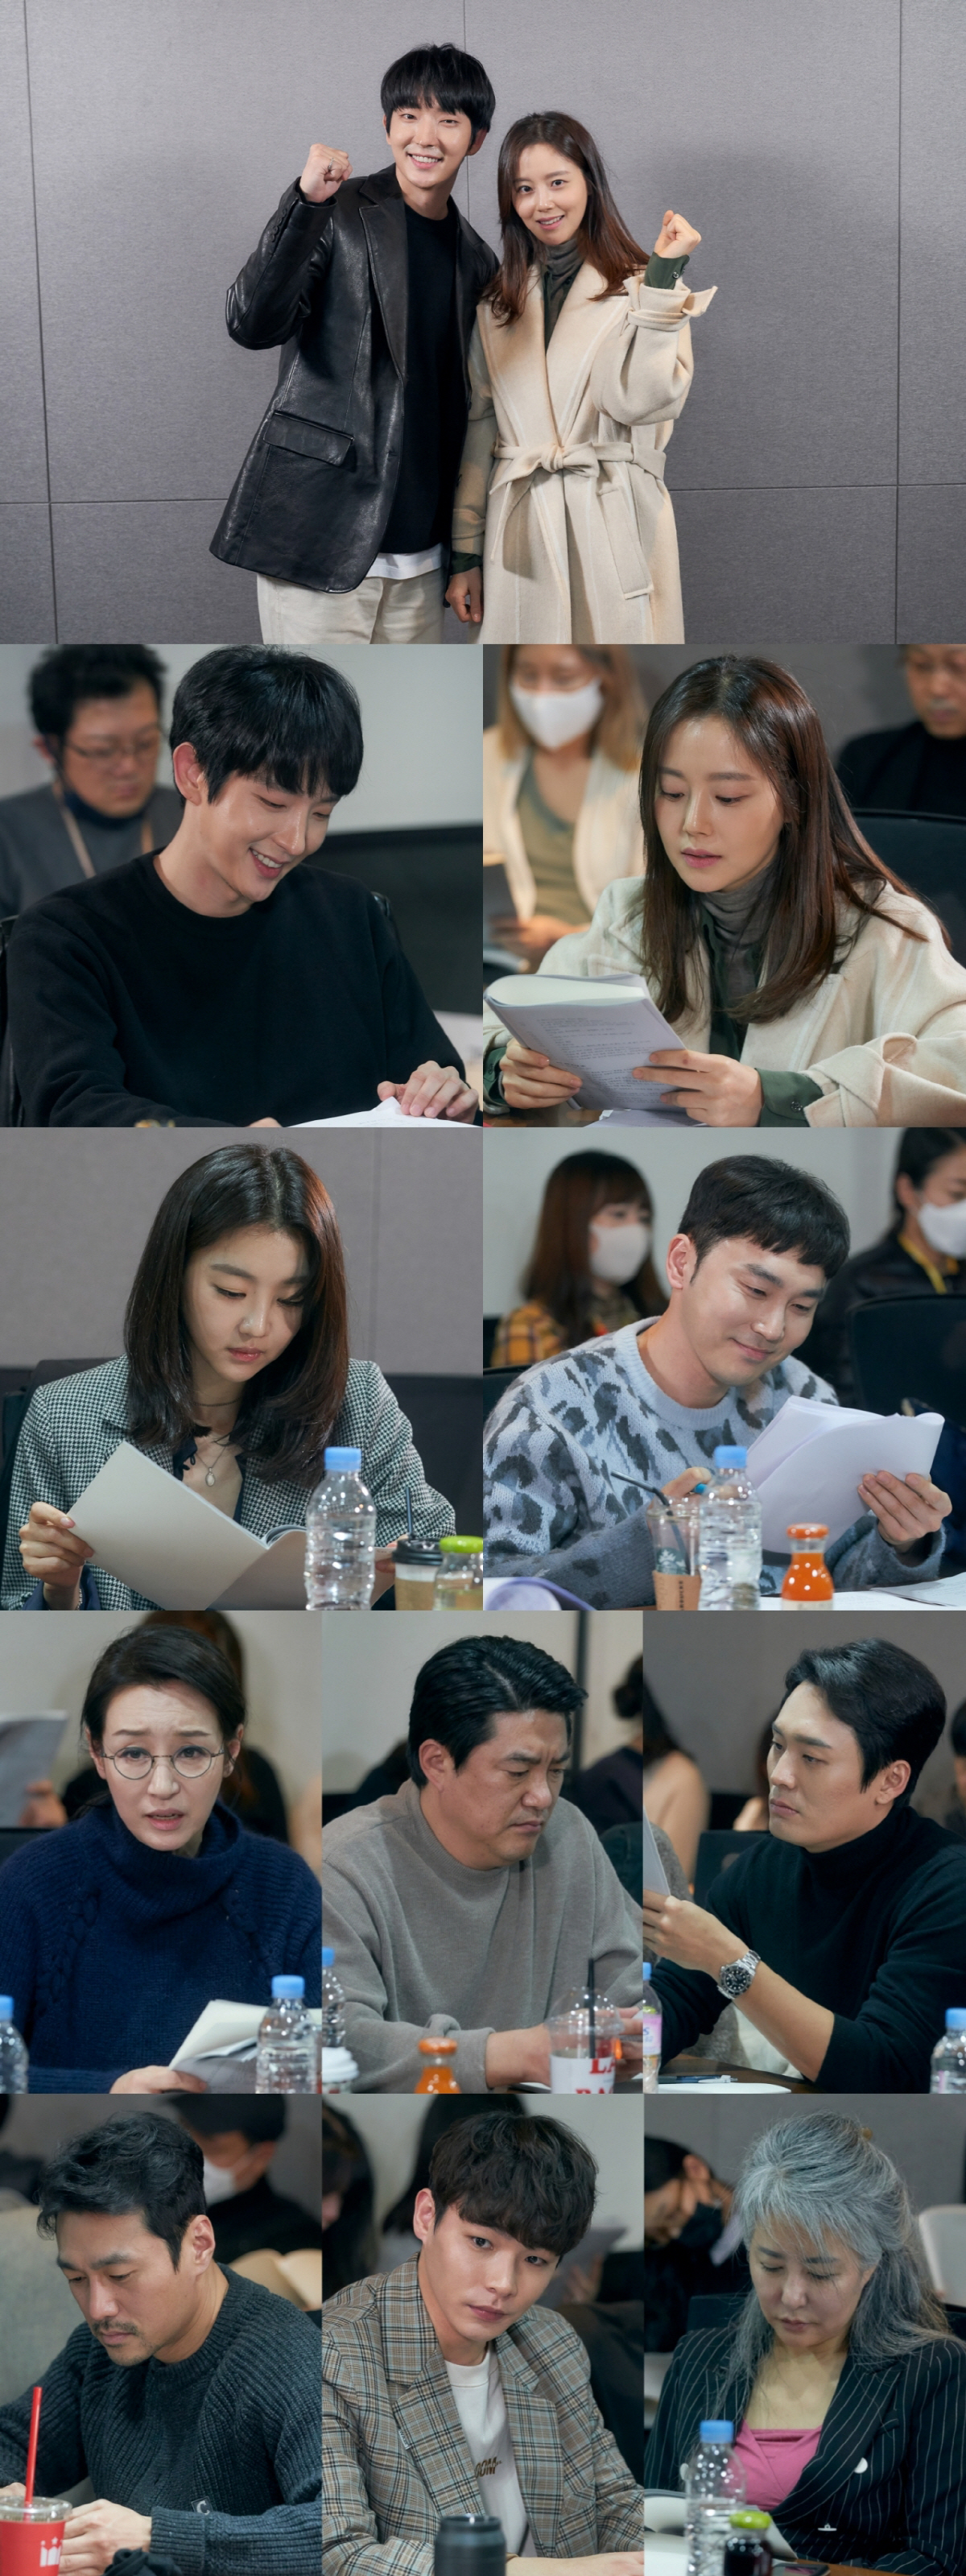 TVNs new tree Drama Flower of Evil has unveiled a promising golden lineup with a transcript reading scene featuring Lee Joon-gi, Moon Chae-won, Jang Hee-jin and Seo Hyeon-woos Hot Summer Days.What if my husband, who has loved me for 14 years, is a serial killer without blood or tears?TVNs new tree Drama The Flower of Evil (directed by Kim Cheol-gyu/playplayplay by Yoo Jung-hee/production studio Dragon, Monster Union) is a man who hid his brutal past and changed his identity, and a homicide Detective wife, Cha Ji-won, who traces his past, who wants to ignore it. It is a high-density emotional tracker of two people in front of the truth.In the Transcript Reading scene, which announced the start of the full-scale voyage, director Kim Chul-gyu of the luxury director who goes to and from melodrama and thriller, writer Yoo Jung-hee, who is attracting attention with his solid writing power, Lee Joon-gi (played by Baek Hee-sung), Moon Chae-won (played by Cha Ji-won), Jang Hee-jin (played by Dohaesu), and Seo Hy Actors, who believed in the Eon-woo (played by Kim Moo-jin), were all in the spotlight.Lee Joon-gi said, I want to leave it as a work that will be remembered for a long time for viewers. Moon Chae-won also expressed his enthusiasm that he would do his best to show good acting as he met good works.Actors, who exchanged greetings in a cheerful atmosphere, began to bloom properly with the Hot Summer Days, which immersed themselves in their roles and filled with the breath and emotions of the ambassadors like Ping Pong.Lee Joon-gi, who was divided into Baek Hee-sung, a man who hid the past like a time bomb in the play, and even loved it, completed the breathtaking tightrope of the extreme, and Moon Chae-won showed a different act of acting with the double charm of his loving wife and charismatic powerful Detective.Above all, if the two melodramatic couple Chemie made the scene hot, the delicate Acting, which is suspicious of each other, filled the scene with breathtaking tension.In this way, the Flower of Evil, which is expected to be an ensemble of four leading characters, will be immersed in Actors, who are not a waste of luxury actor modifiers such as Kim Ji-hoon, Choi Byung-mo, Son Jong Hak, Nam Ki Ae and Yoon Byung Hee.It is said that the production teams ambitious aspiration to make it impossible to let go of the tension as the additional impact figures continue to appear until the middle and late.In addition, the four-color, four-color, four-color, three-color, four-color, three-color, three-color, three-color, three-color, three-color, three-color, three-color, three-color, three-color, three-color, three-color, three-color, three-color, three-color, three-color, three-color, three-color, three-color, three-color, three-color, three-color, three-color, three-color, three-color, three-color, four-color, four-color, four-color, four-color, three-color, three-color,TVNs new tree drama Flower of Evil, which predicts the perfect synergy of relief, including Lee Joon-gi, Moon Chae-won, Jang Hee-jin, and Seo Hyeon-woo, as well as directing and scripting, will be broadcast first in July.